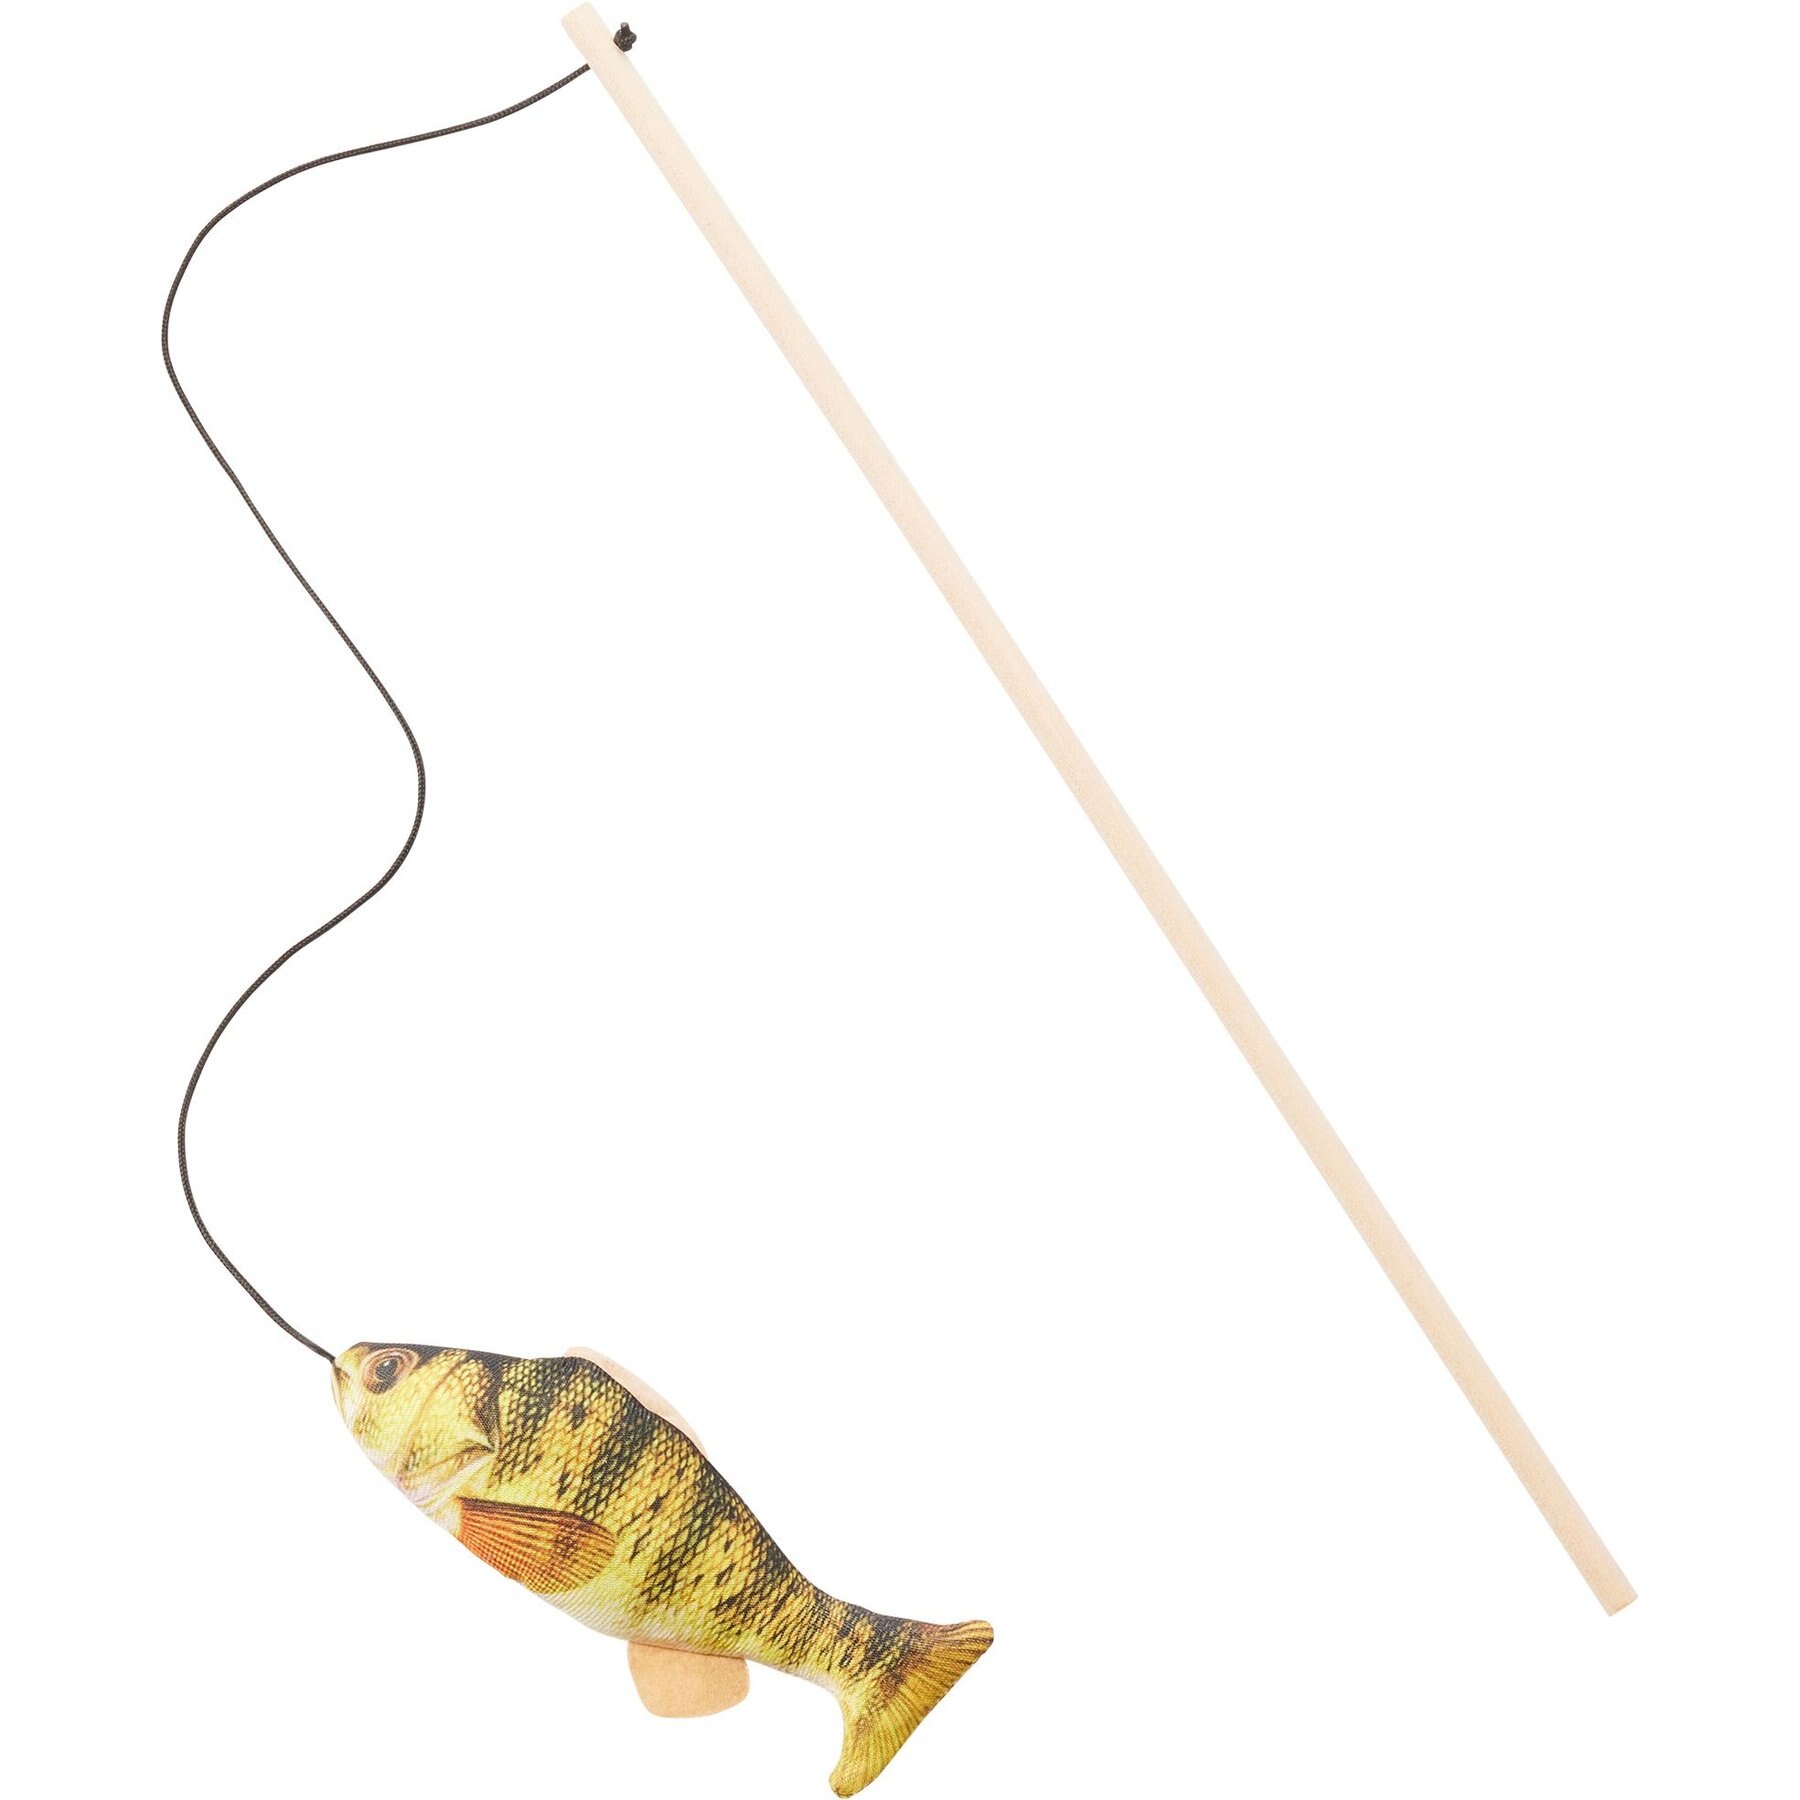 Ethical Spot Gone Fishin Tsr Wand Assorted Cat Toy 